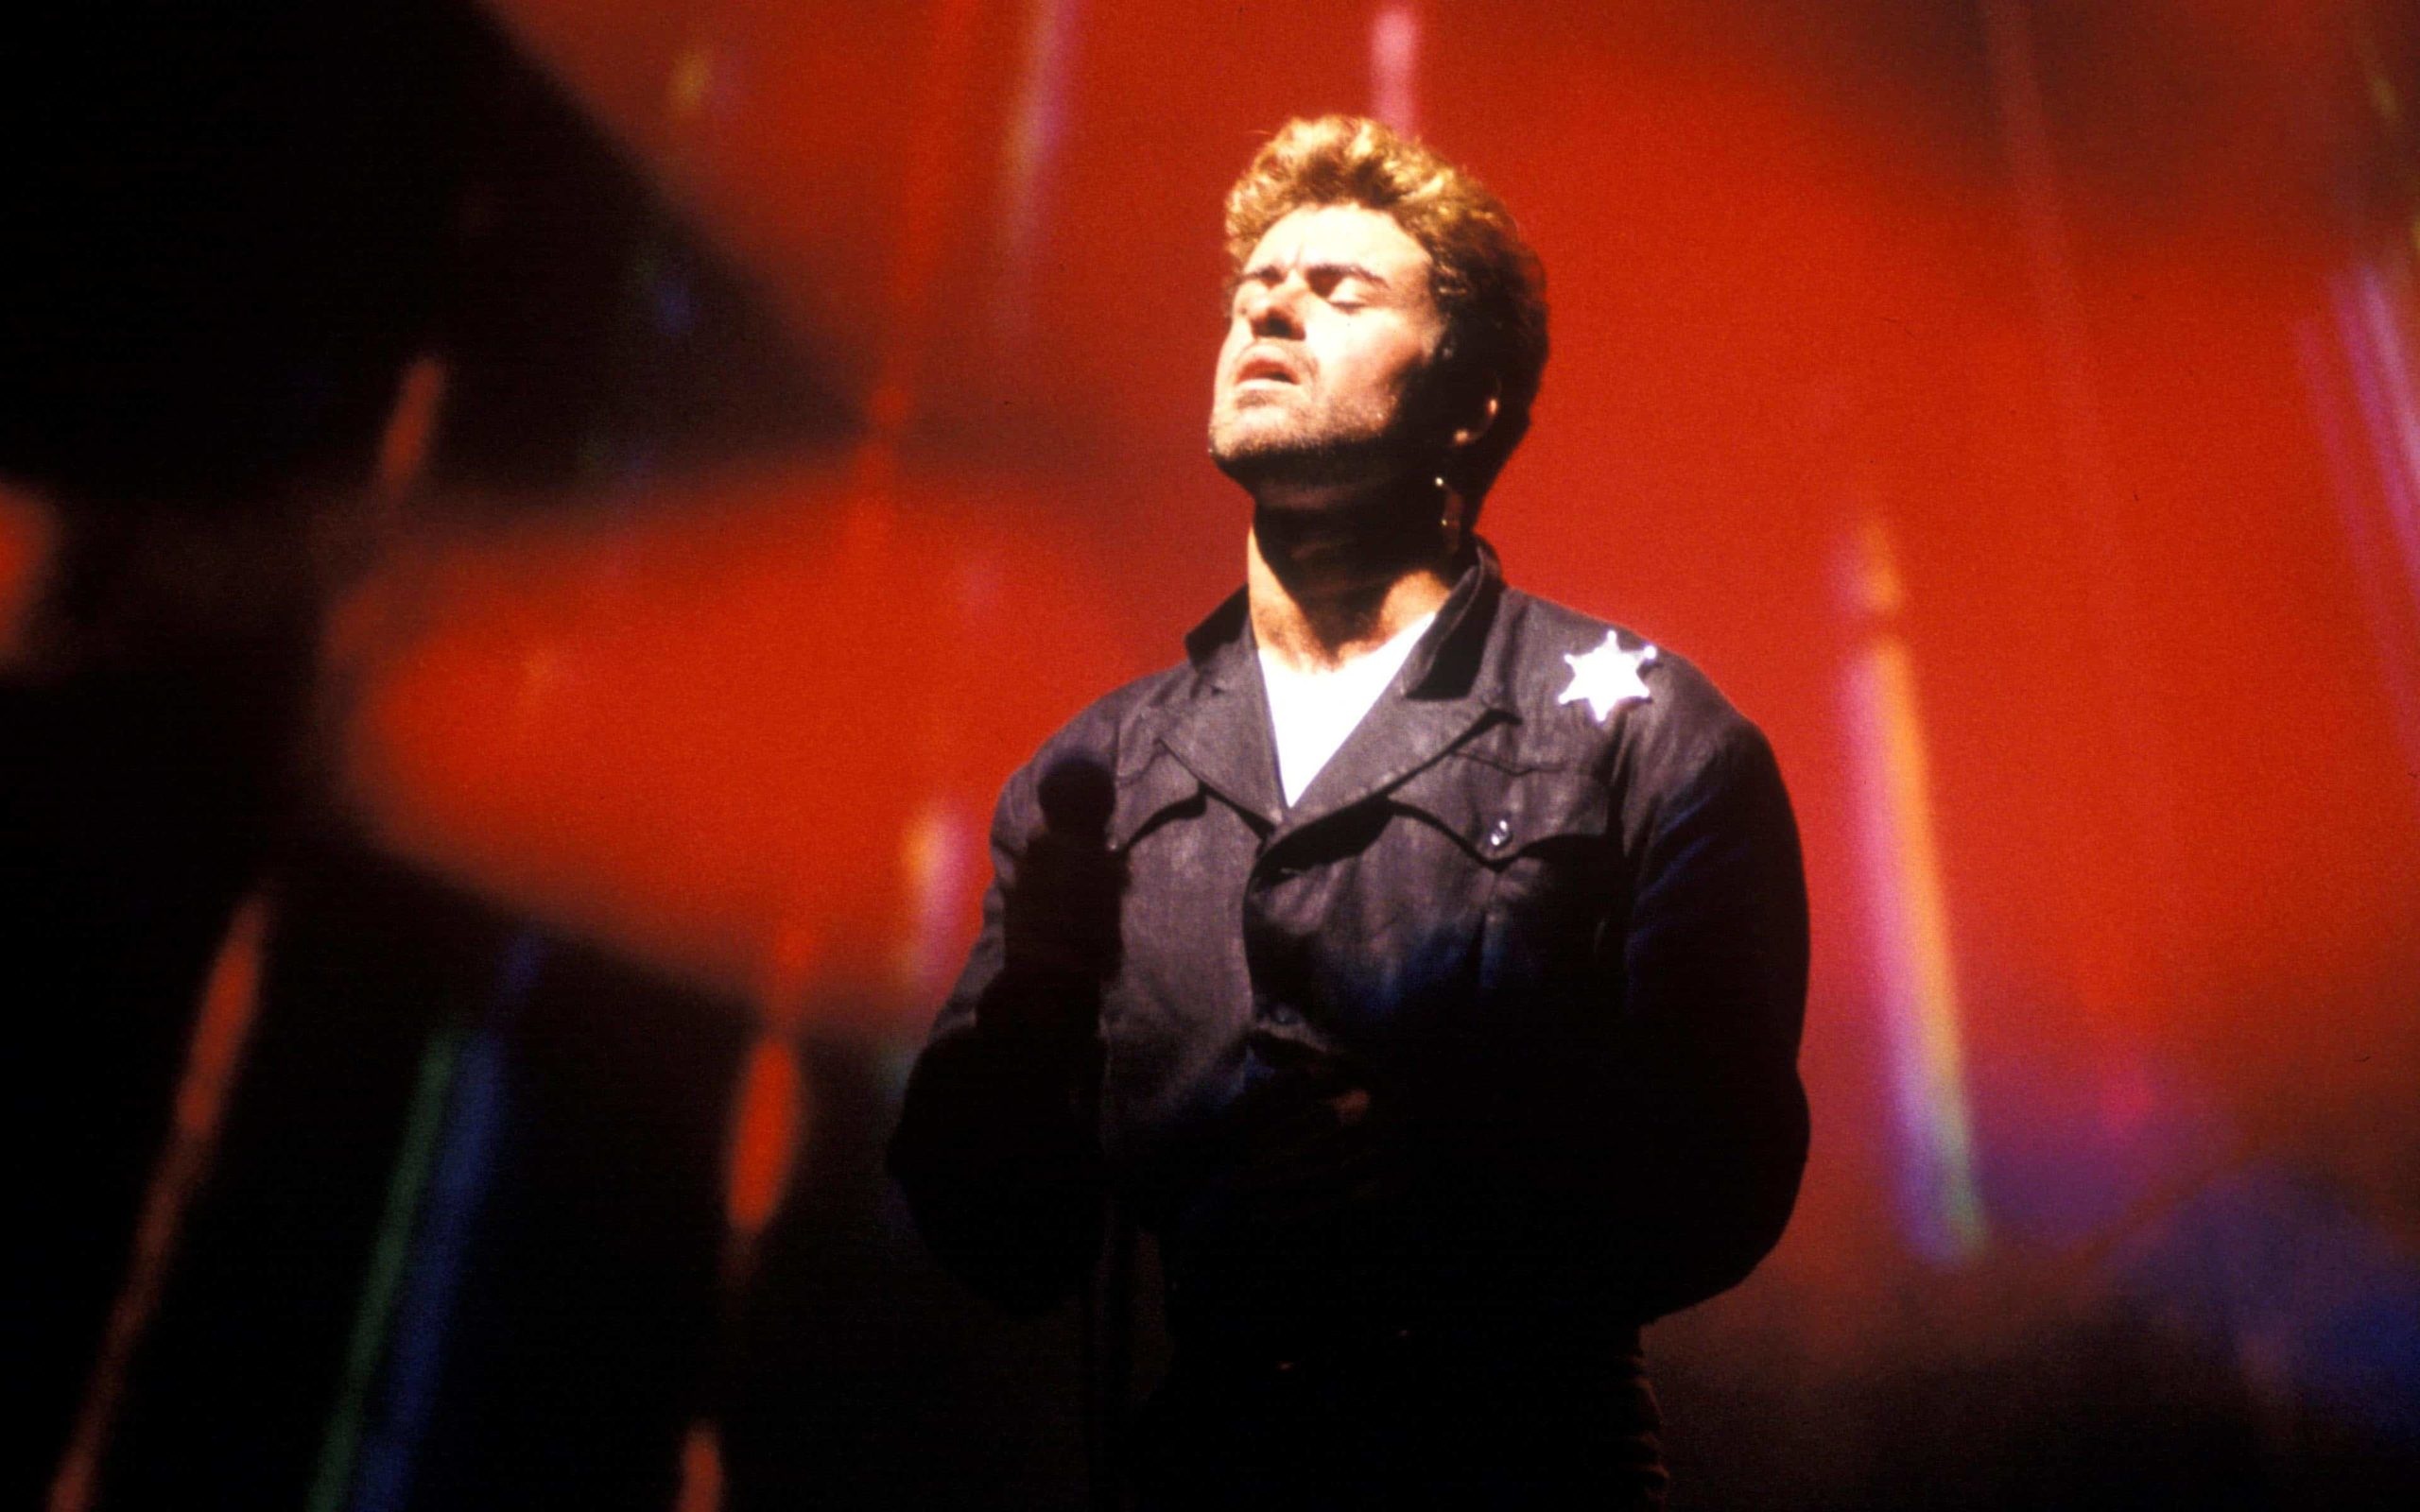 George Michael: Known as a creative force in songwriting, vocal performance, and visual presentation. 2560x1600 HD Wallpaper.